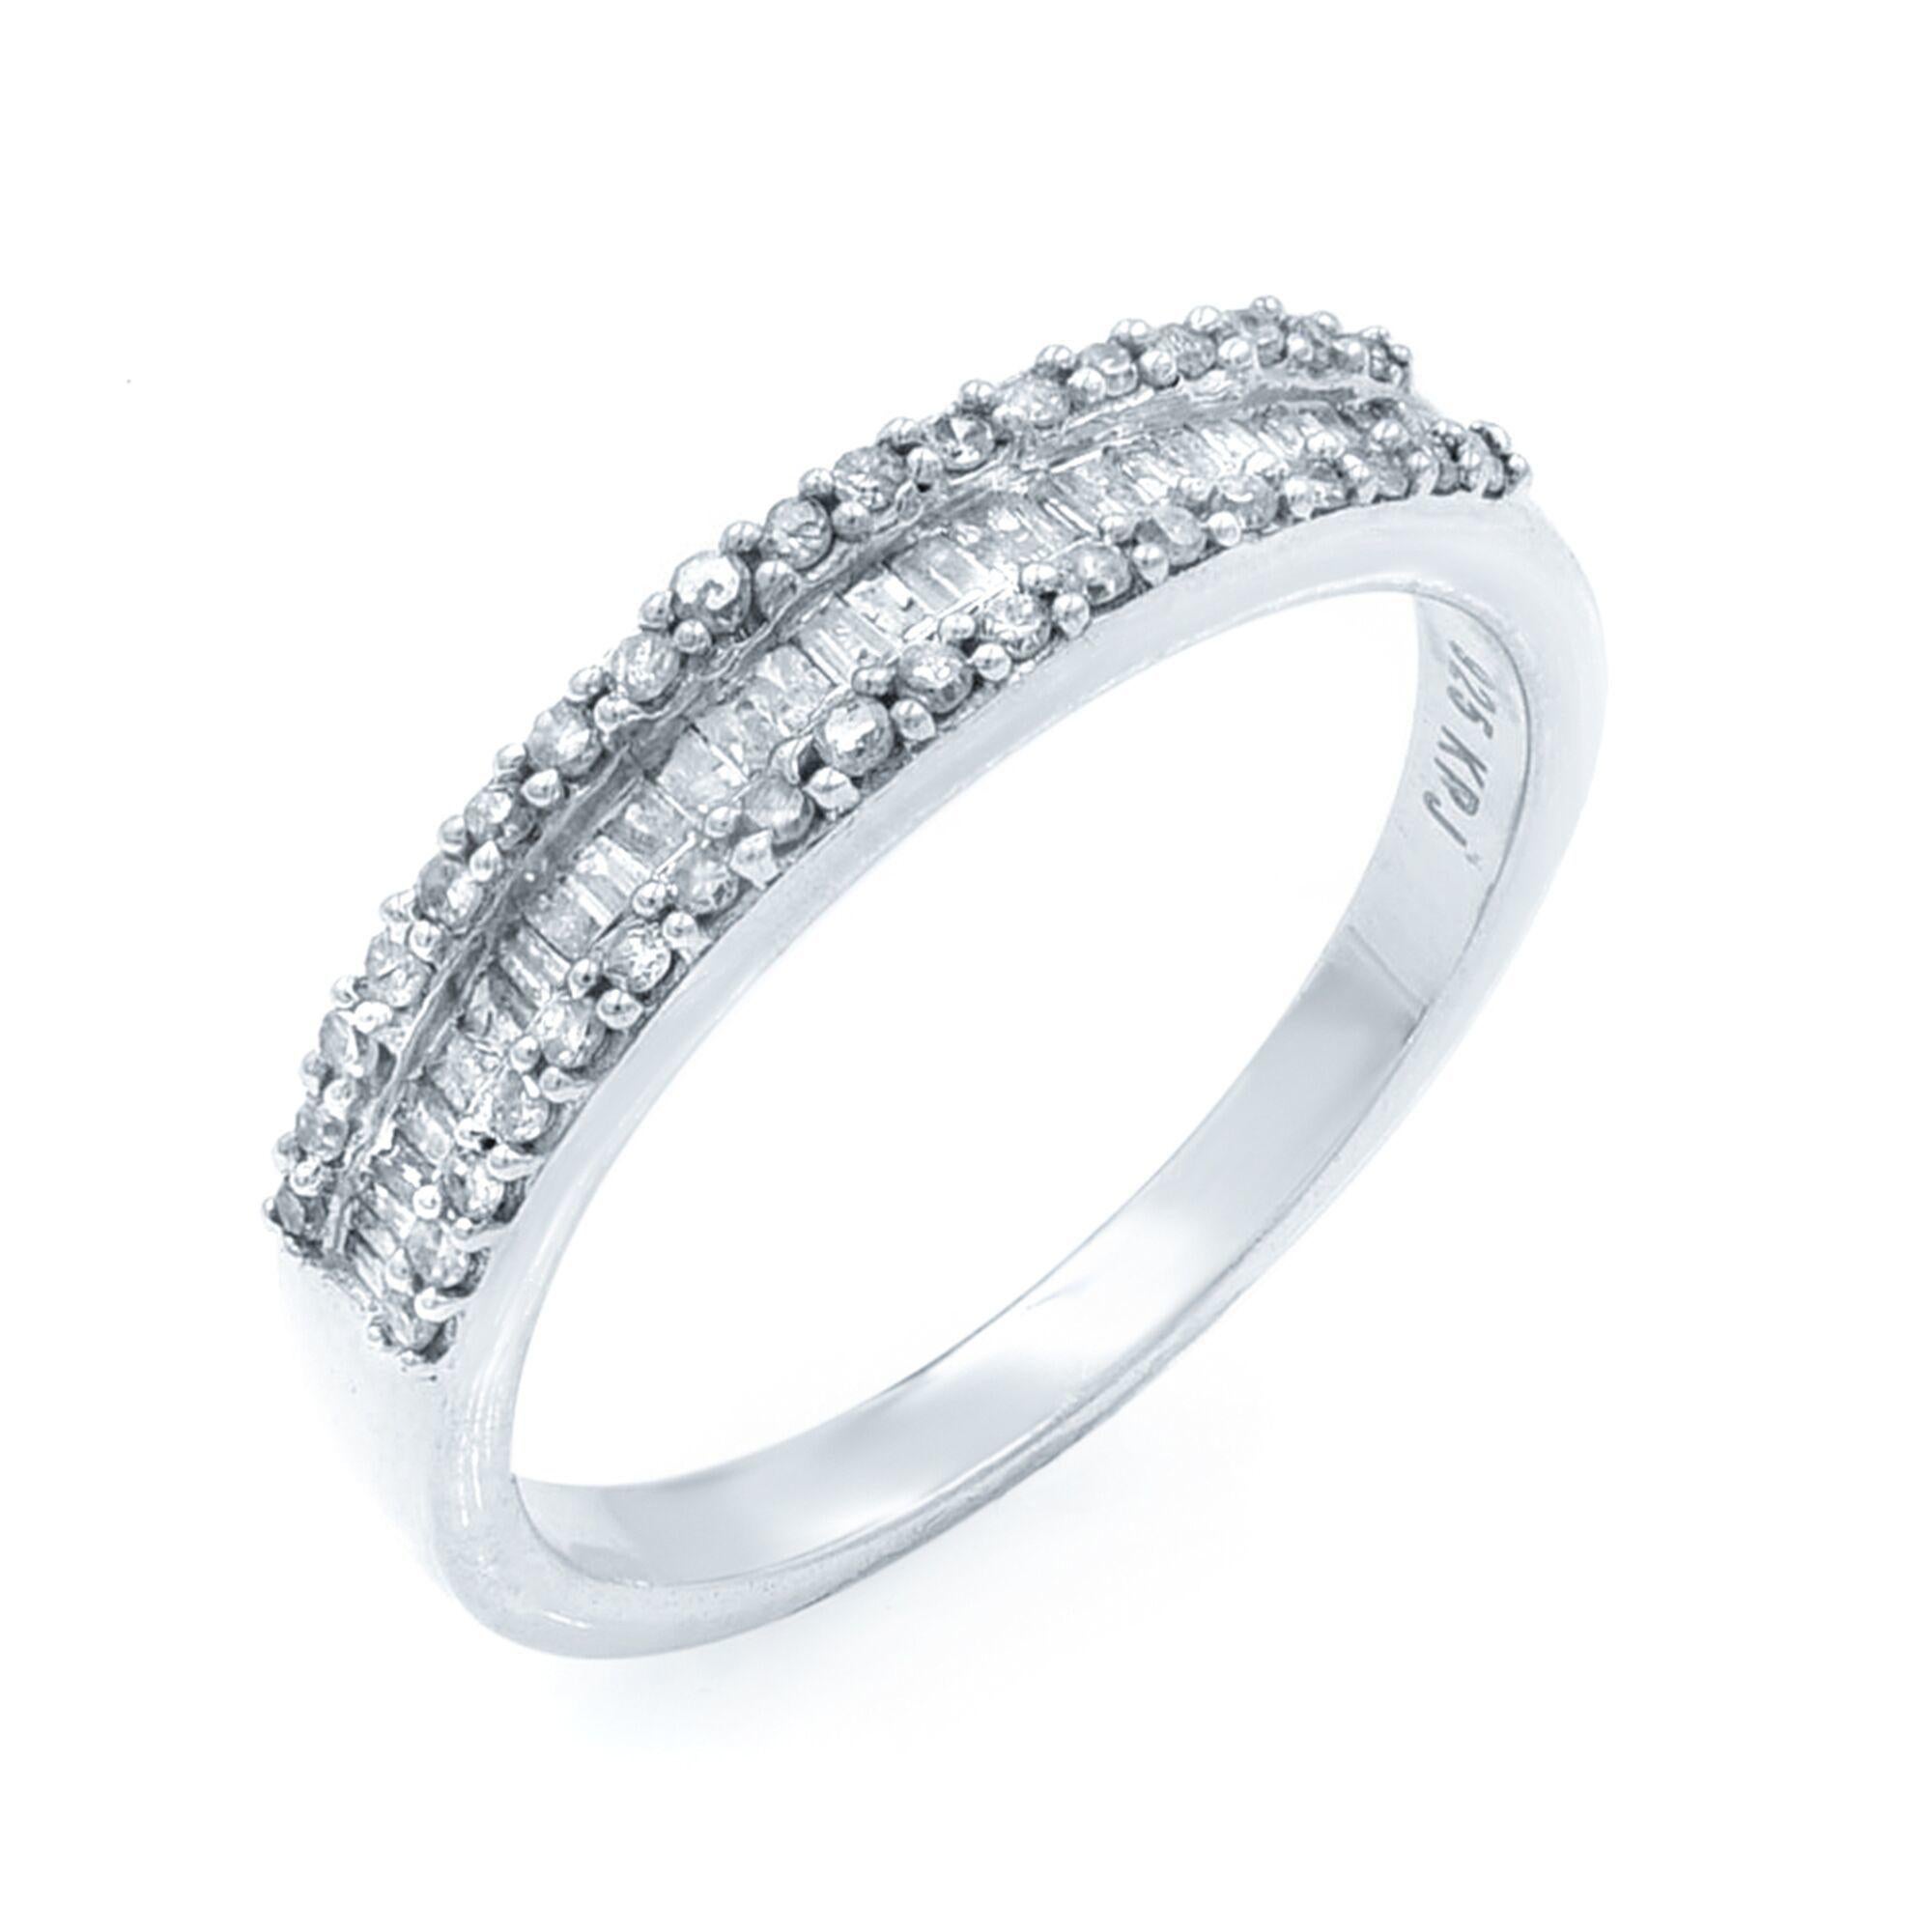 This ring is crafted in 925 sterling silver and features 1.00 Cttw of round and baguette-cut diamonds. Ring width: 4.9mm. Ring size: 10. The total weight is 3.5gms. Comes with a presentable gift box. 